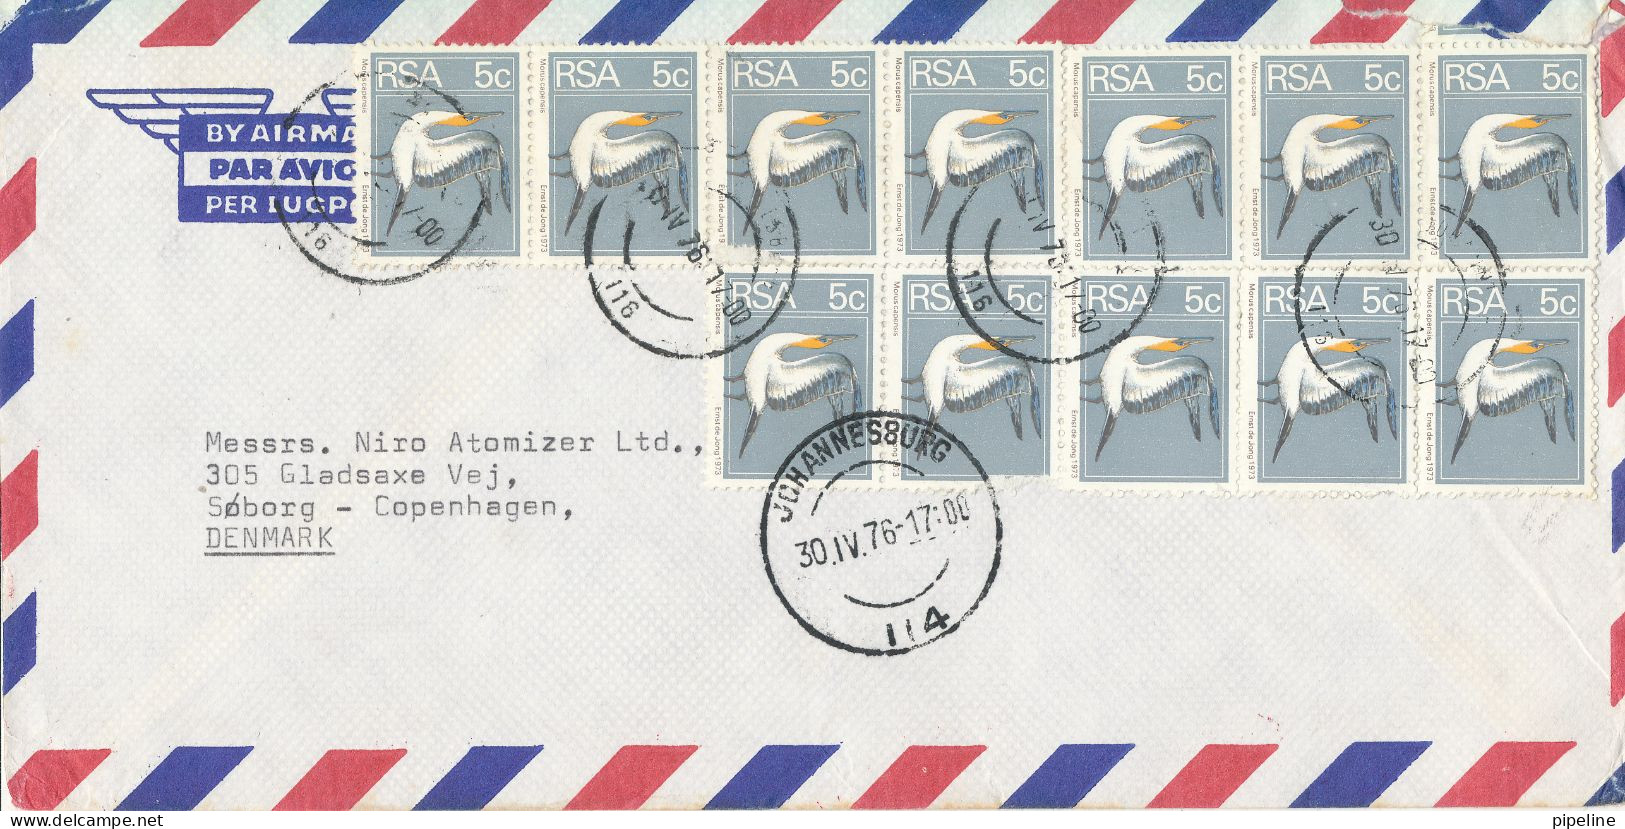 South Africa RSA Air Mail Cover Sent To Denmark 30-4-1976 With A Lot Of BIRD Stamps - Posta Aerea